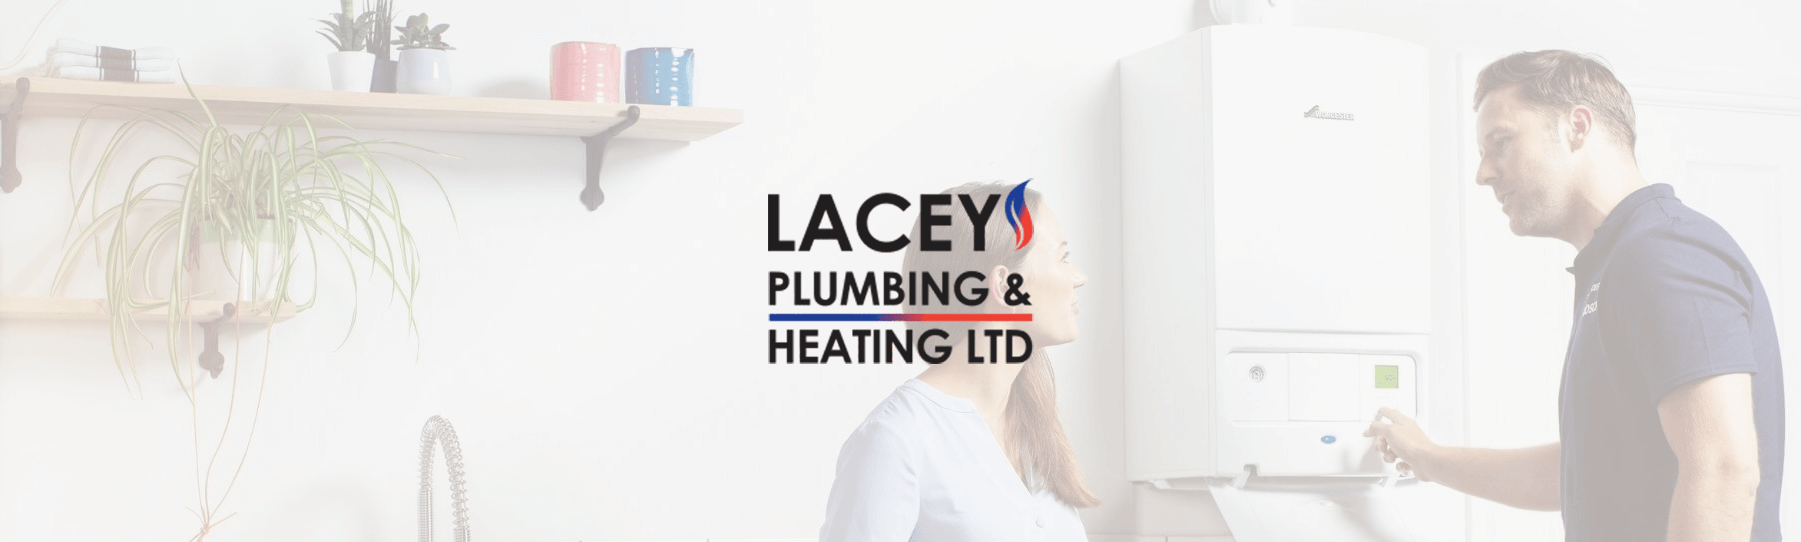 Lacey Plumbing and Heating